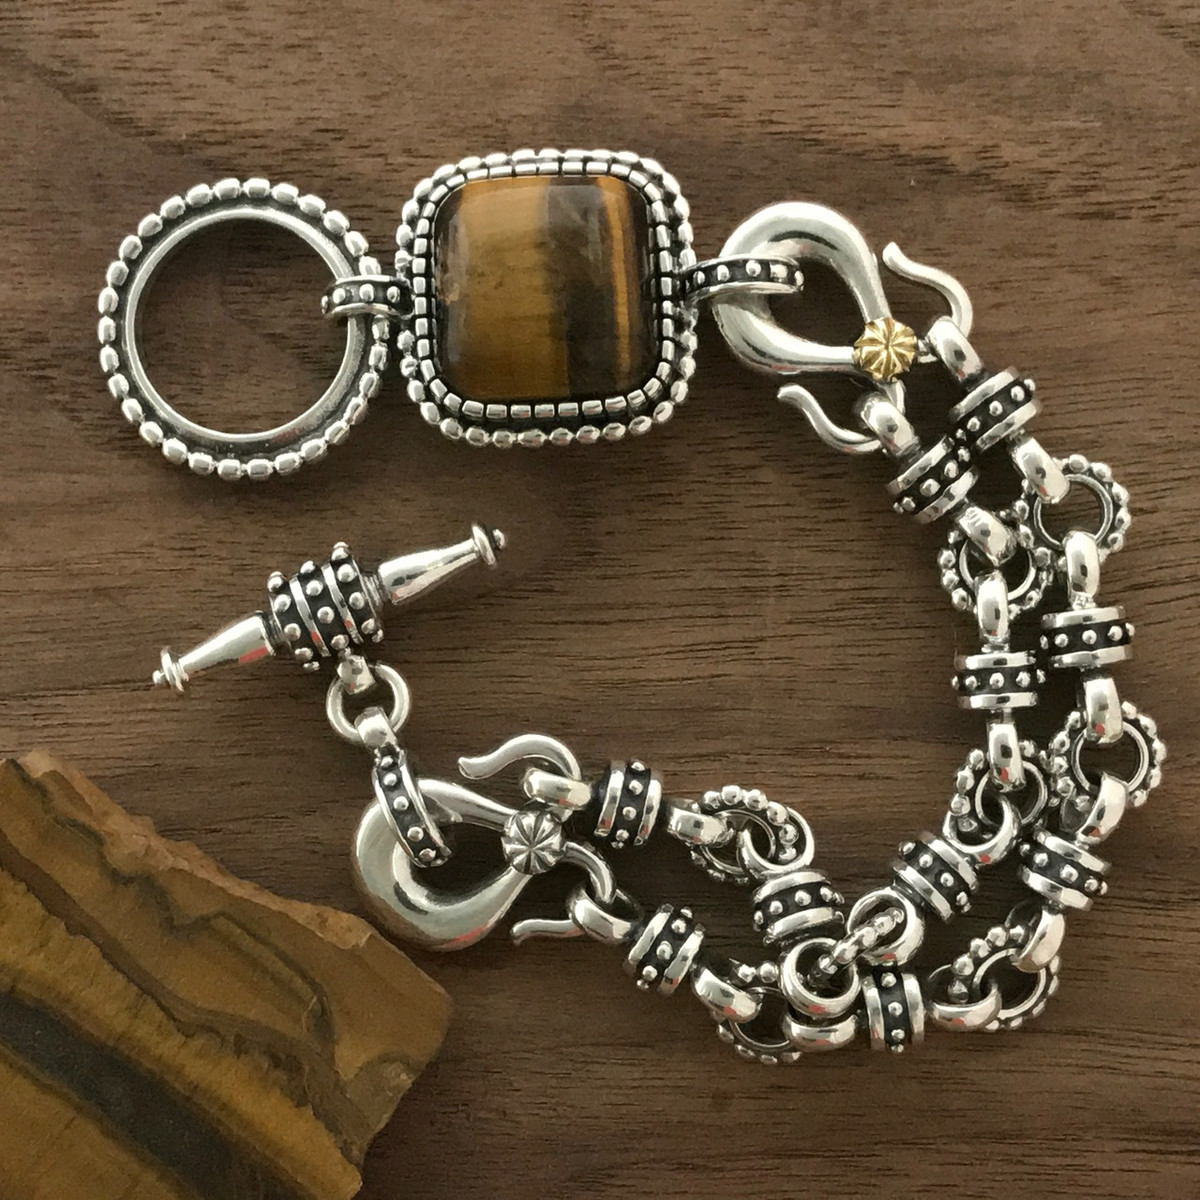 Silver Toggle Bracelet with Tiger Eye by Bowman Originals